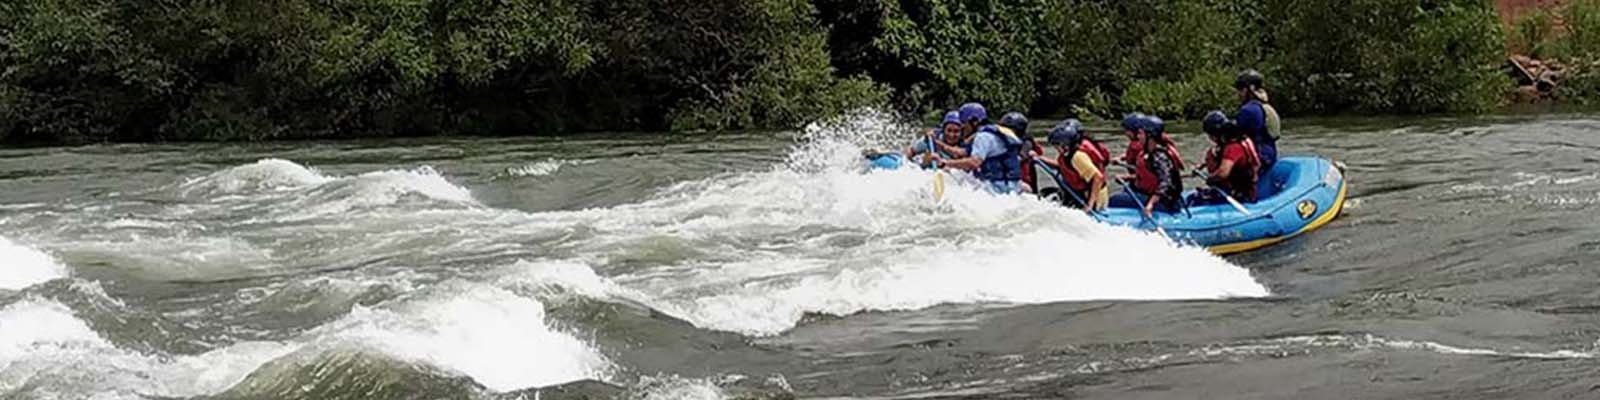 River Rafting near Mumbai | One Day & Stay Packages